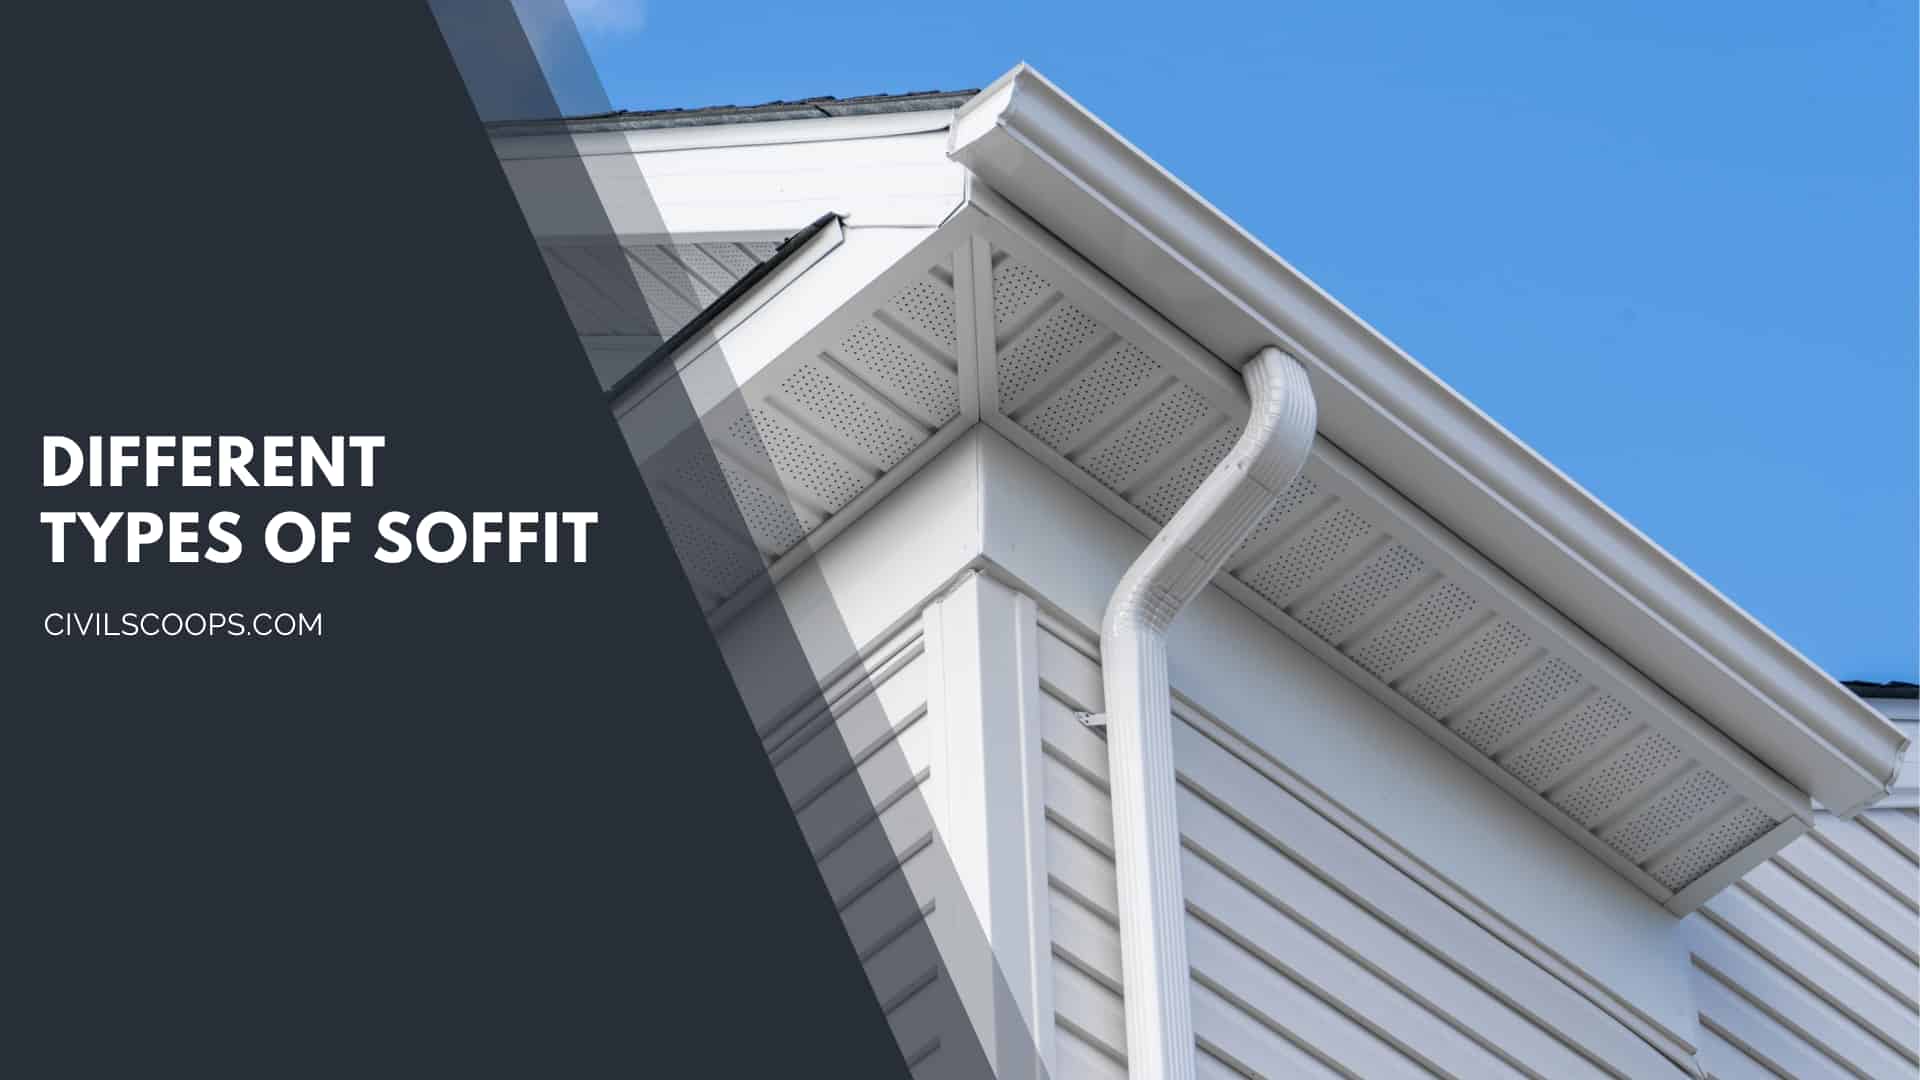 Different Types of Soffit